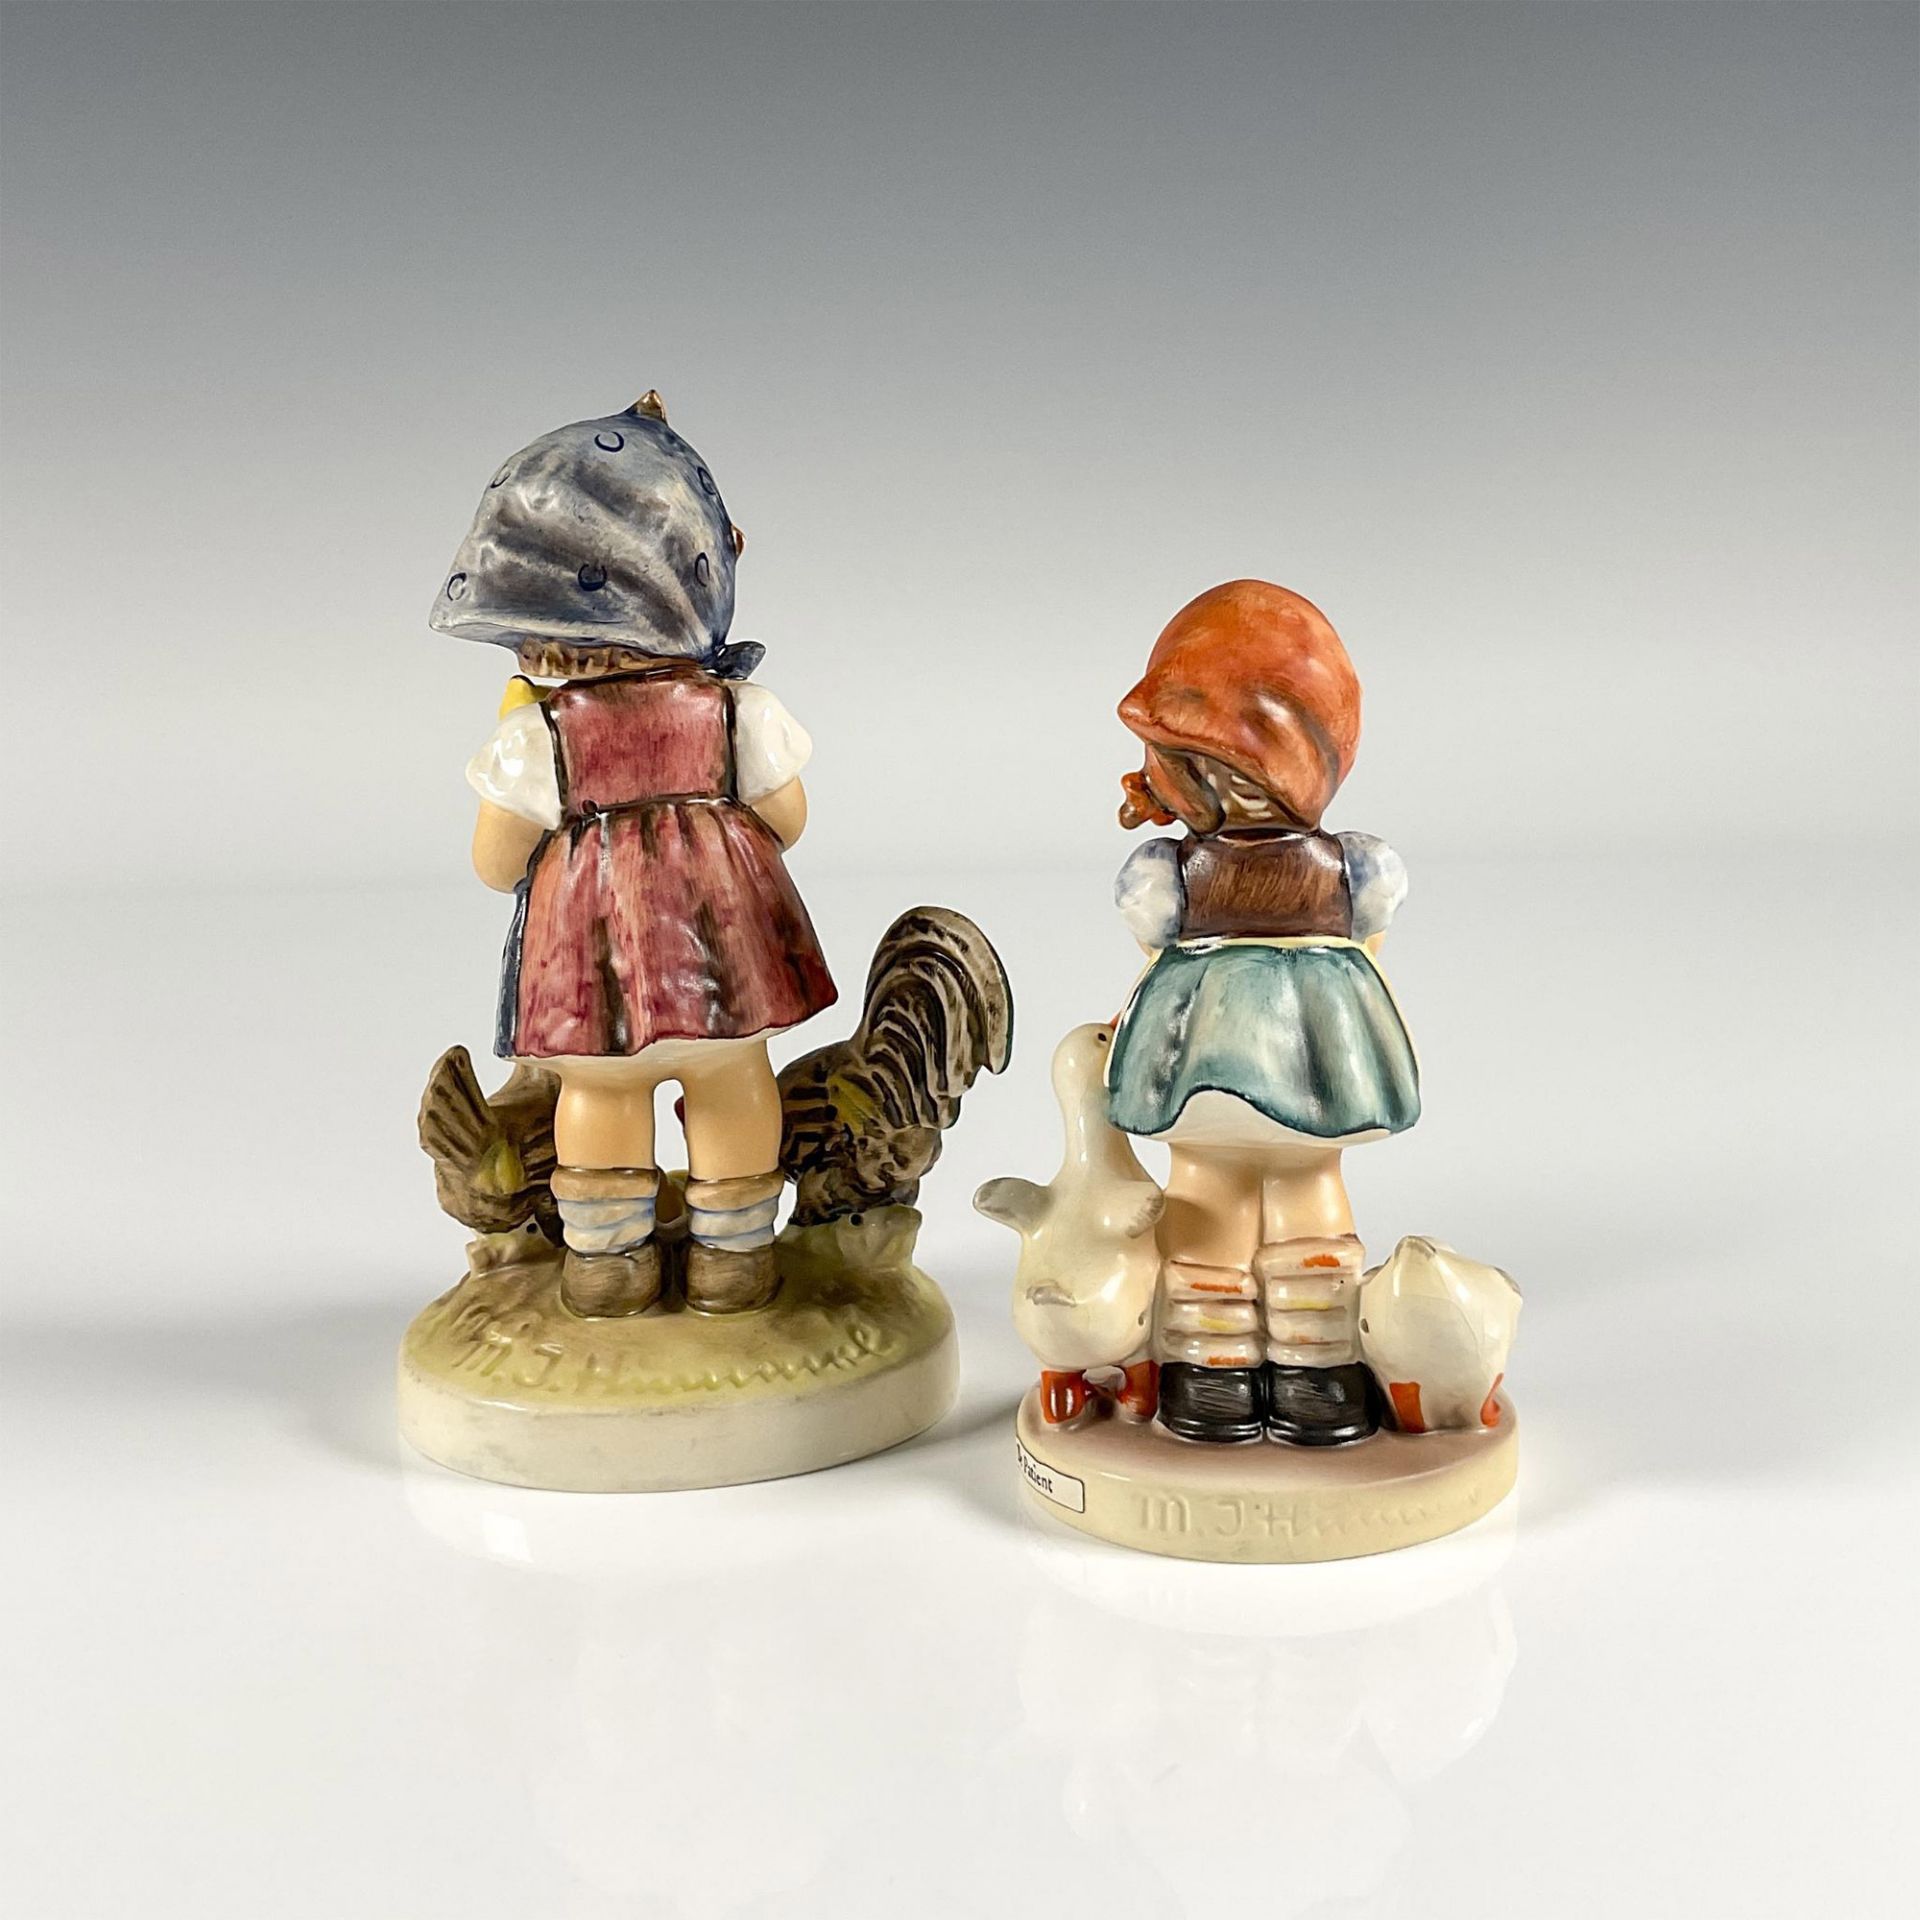 2pc Goebel Hummel Figurines, Be Patient, Feeding Time - Image 2 of 3